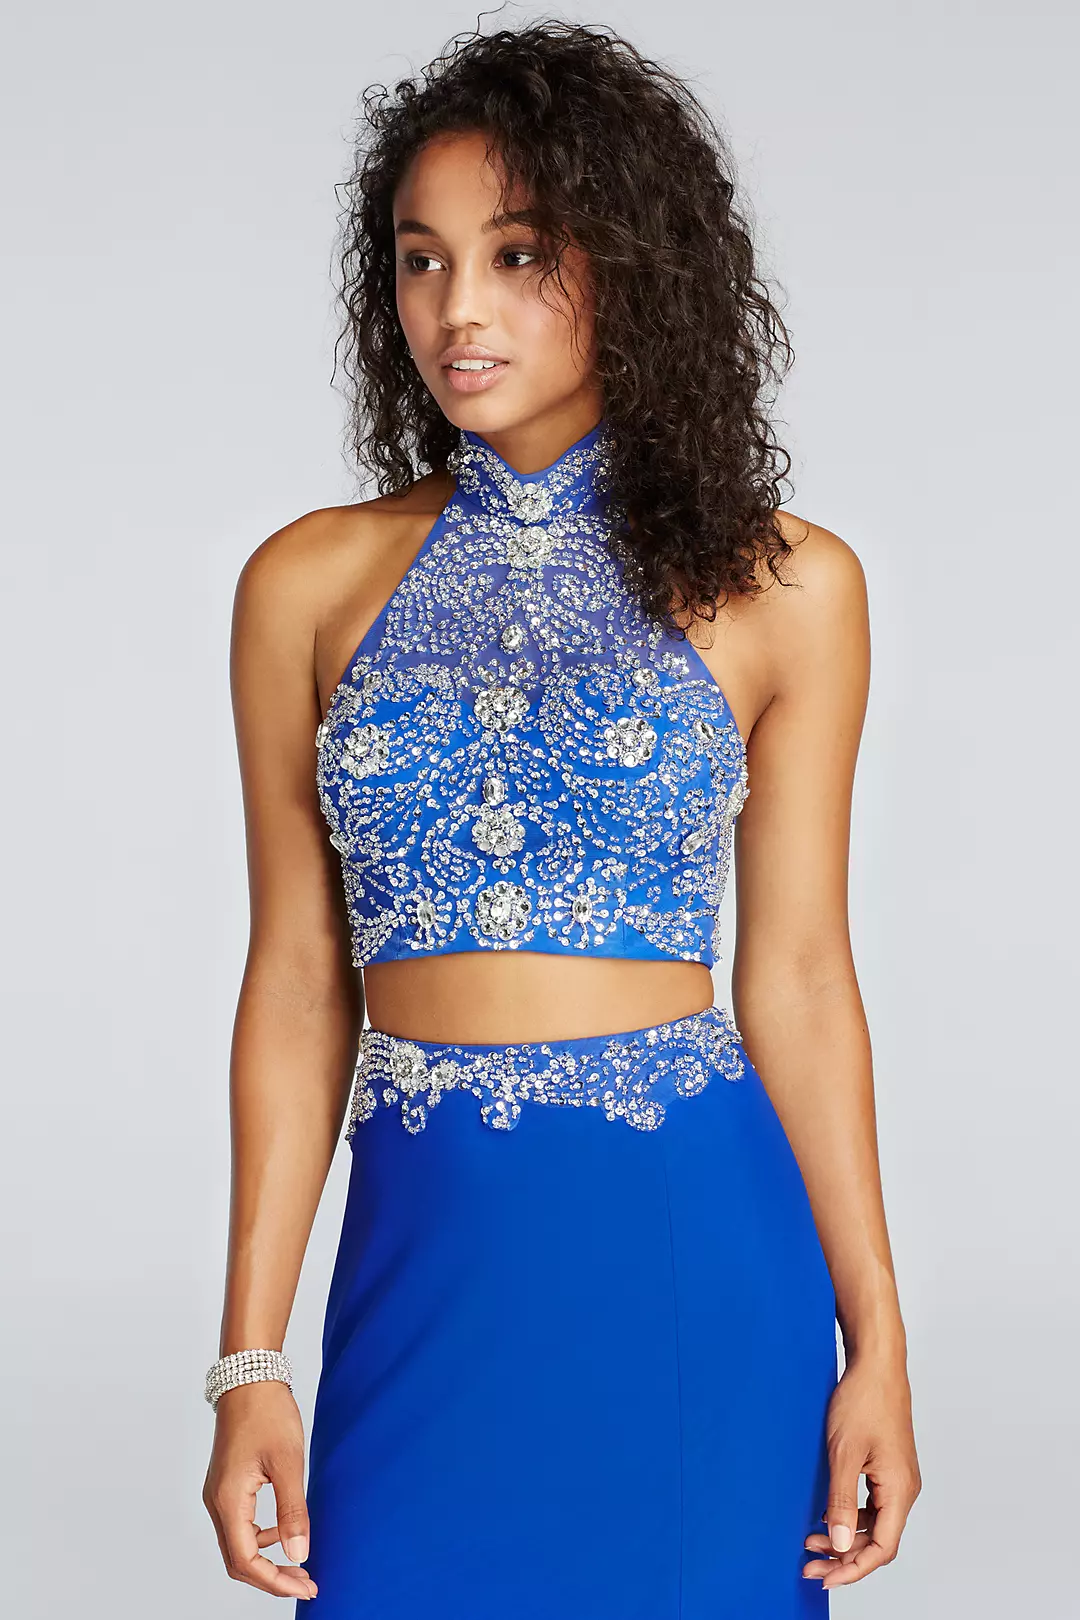 Two Piece Crystal Halter Prom Crop Top with Skirt Image 3